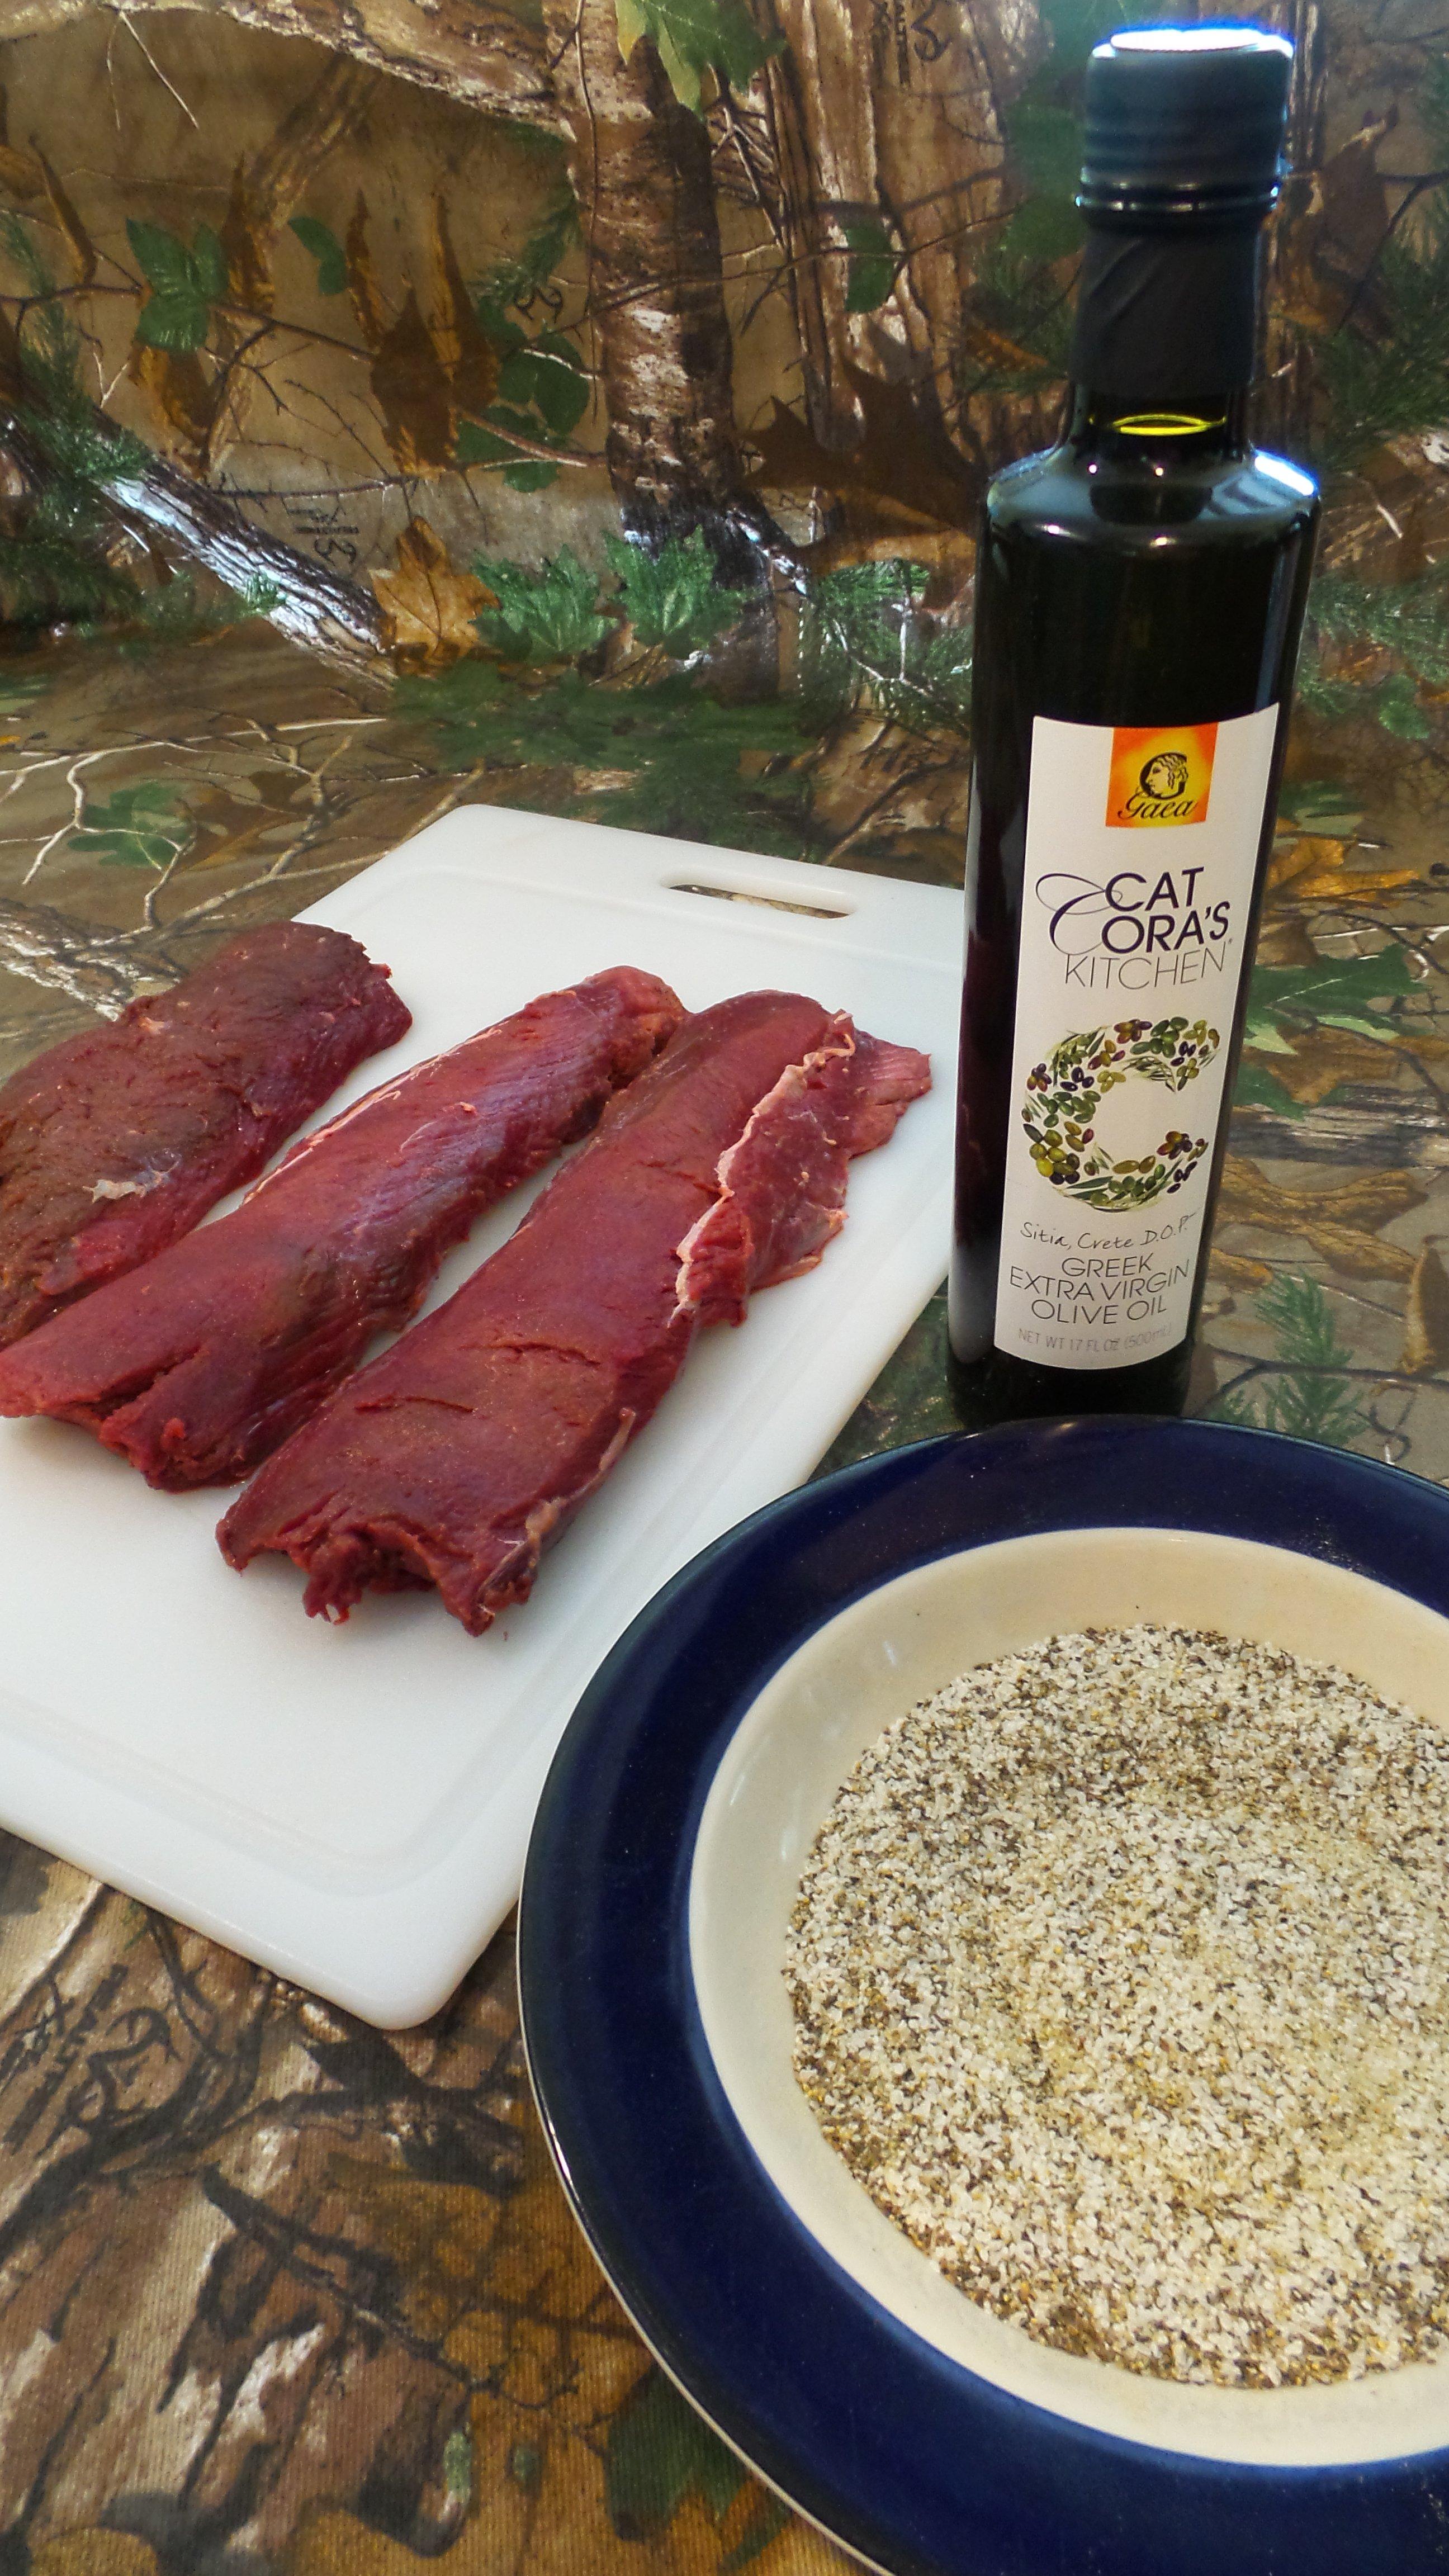 Rub the backstraps with olive oil and season with house blend seasoning.